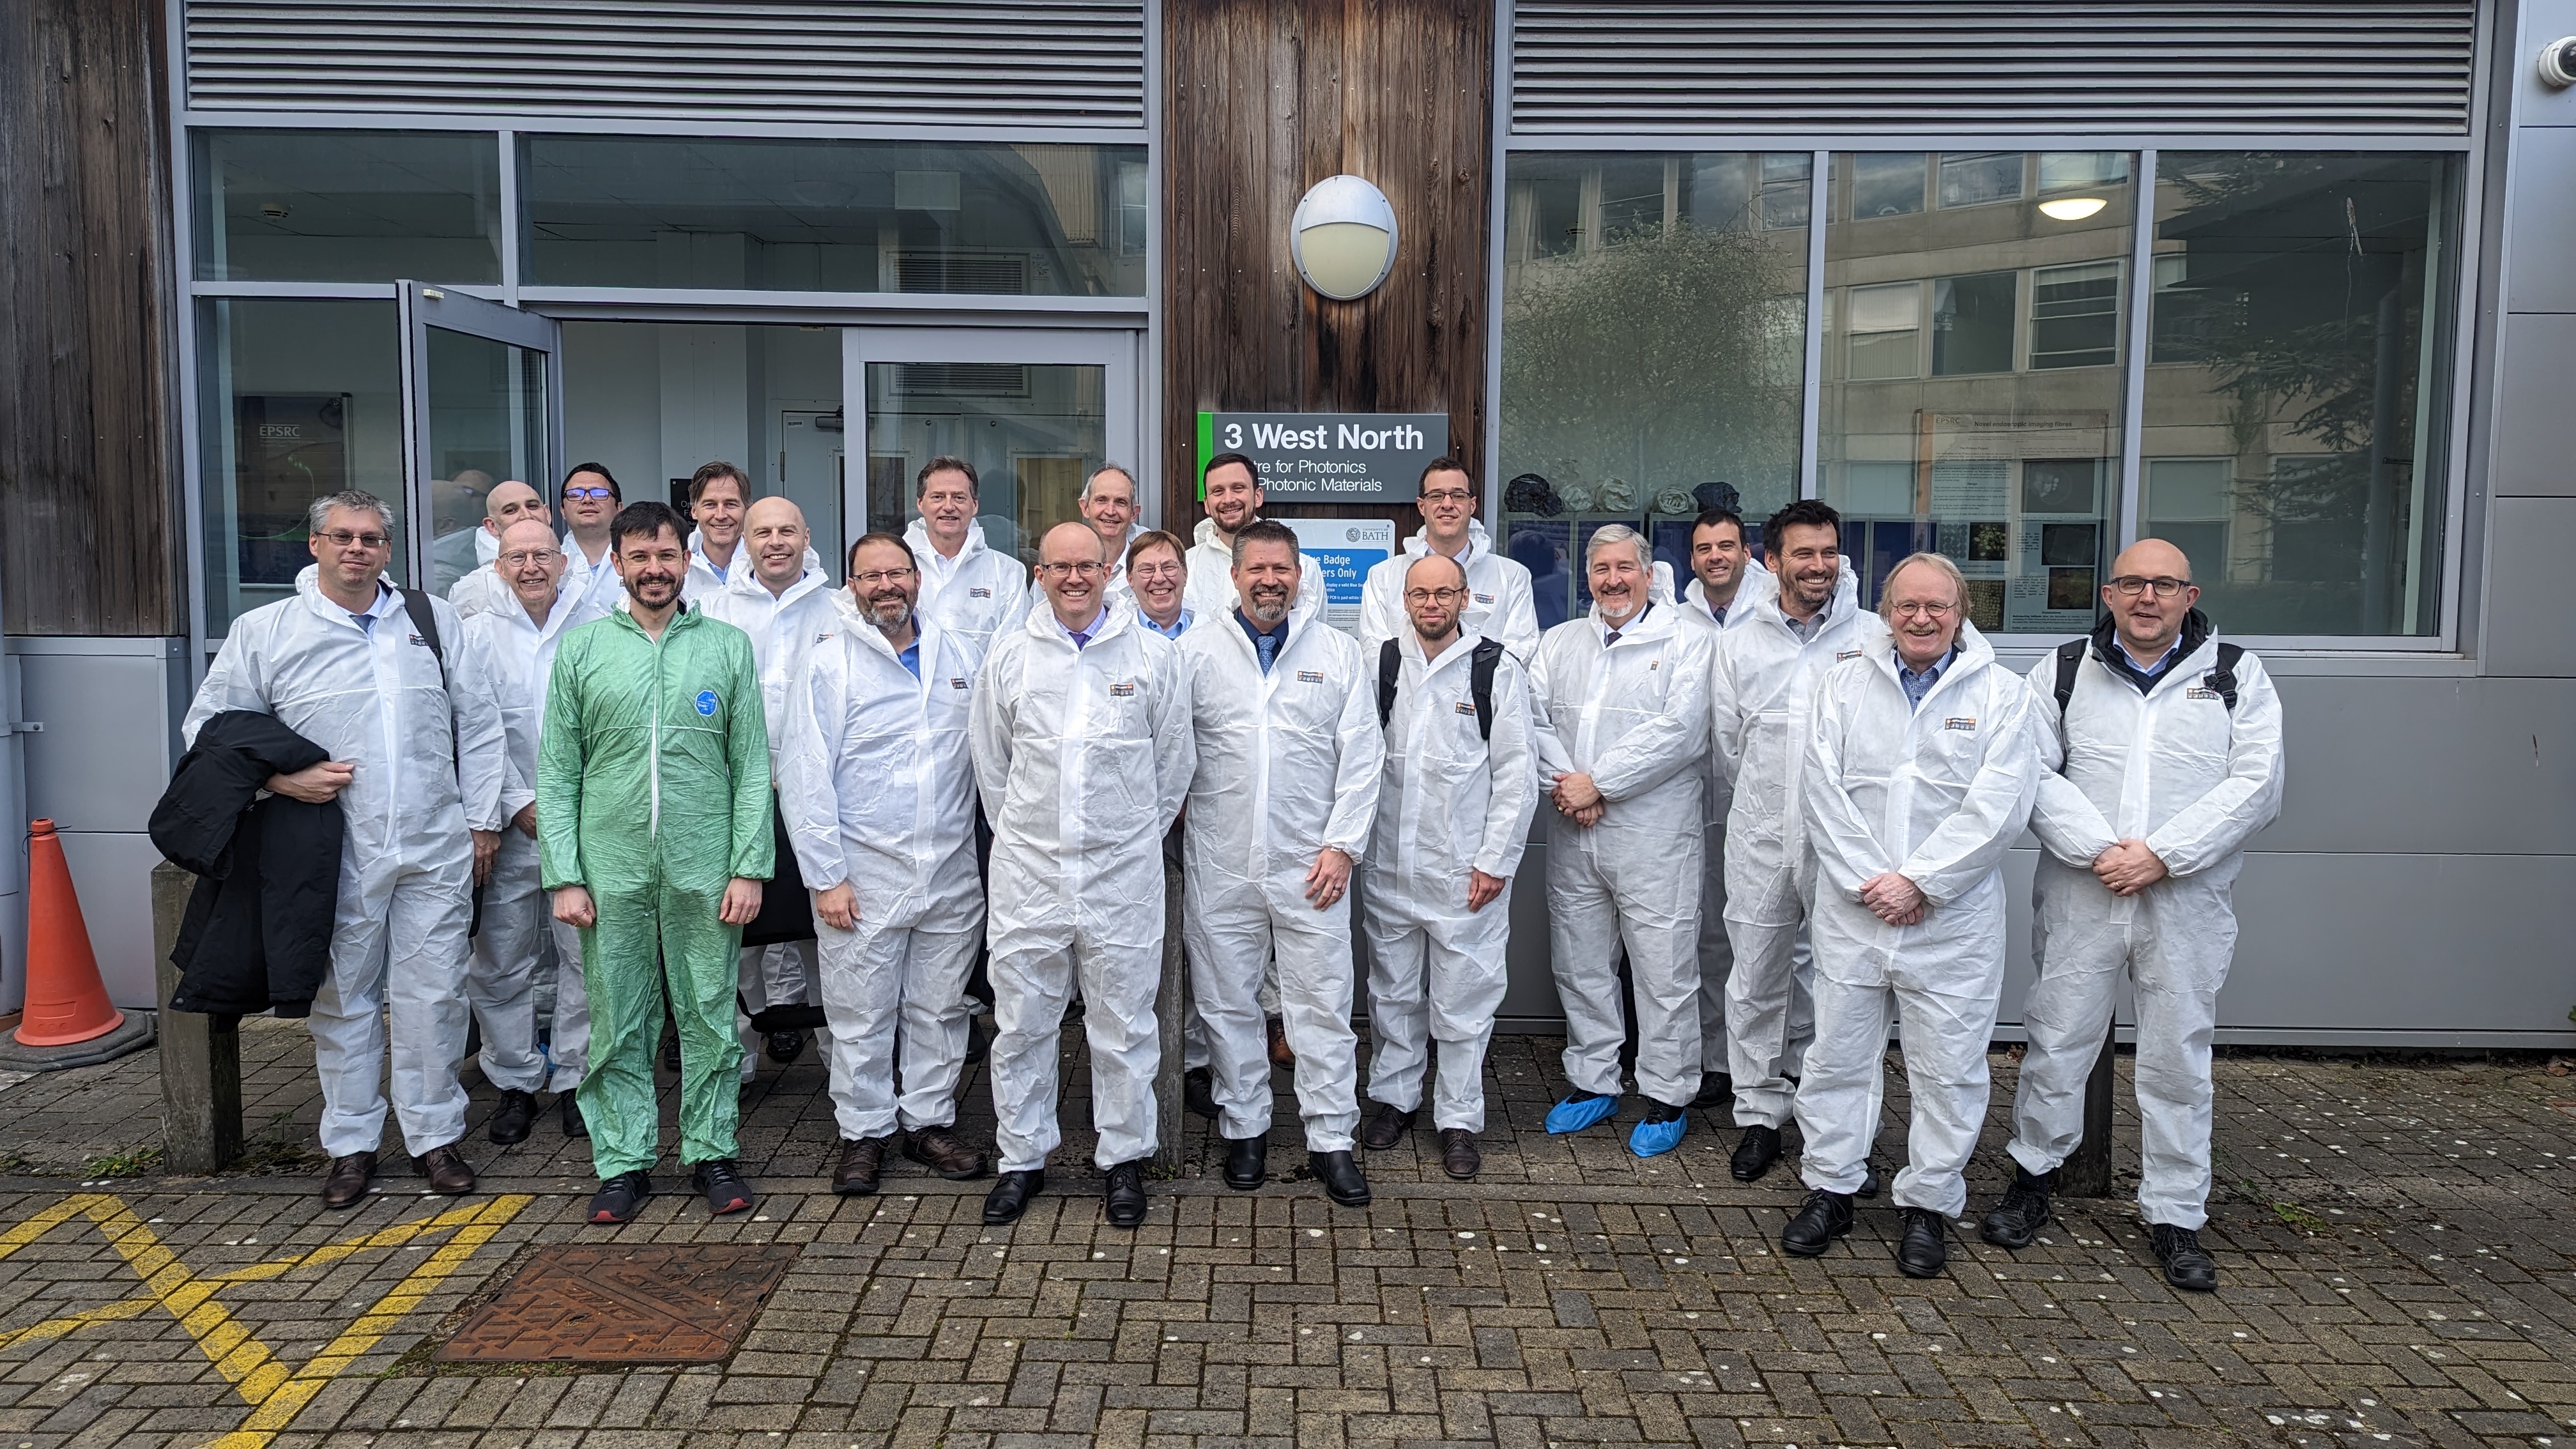 A group of mean wearing protective suits stands outside the Centre for Photonics and Photonic Materials